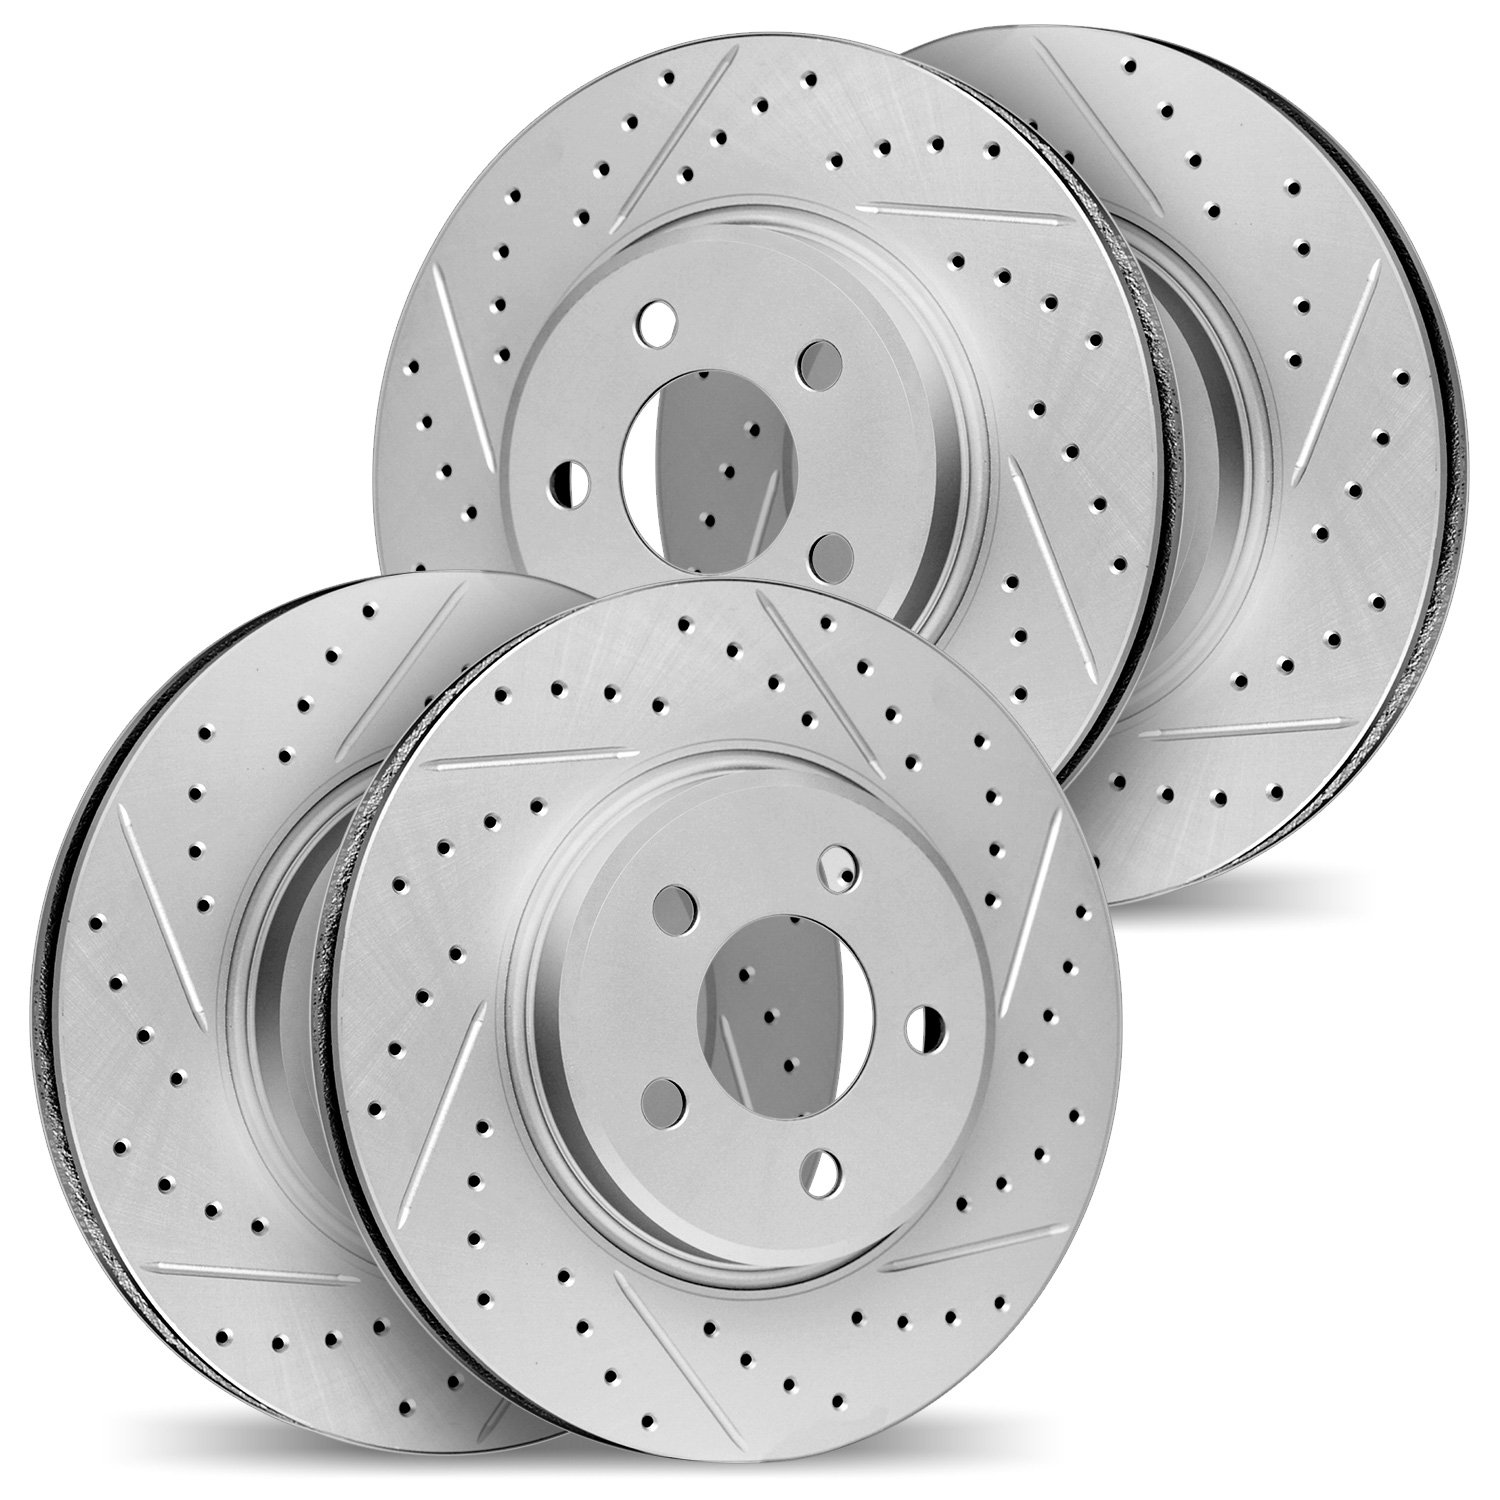 2004-31026 Geoperformance Drilled/Slotted Brake Rotors, Fits Select Multiple Makes/Models, Position: Front and Rear